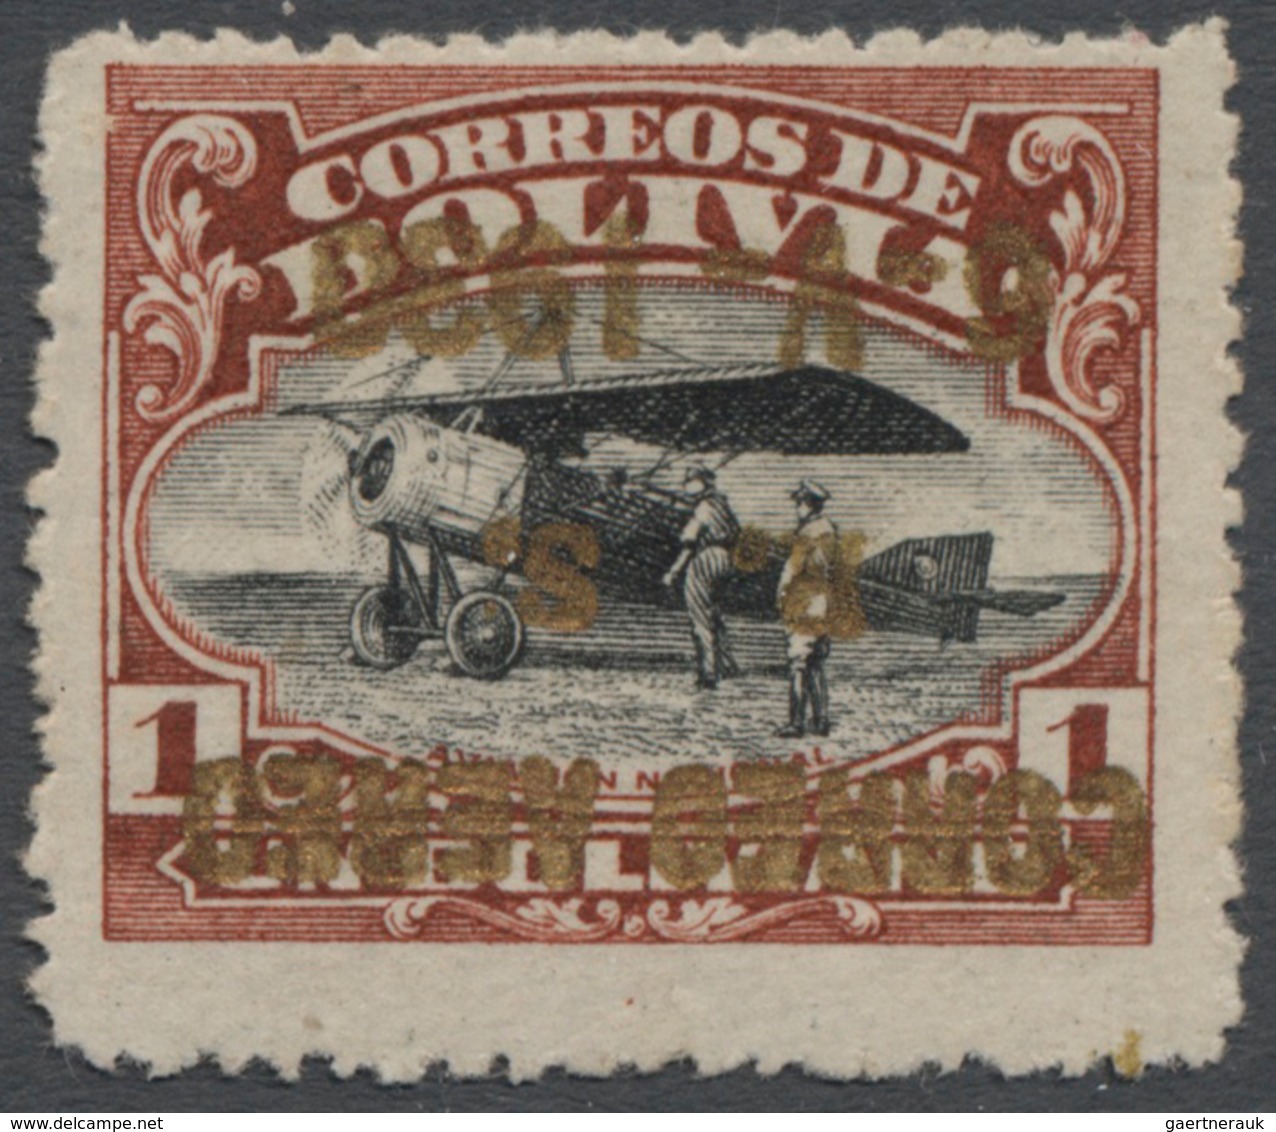 Bolivien: 1930, Visit Of The Airship "Graf Zeppelin" In South America, 1 Bolivar With Inverted Metal - Bolivië